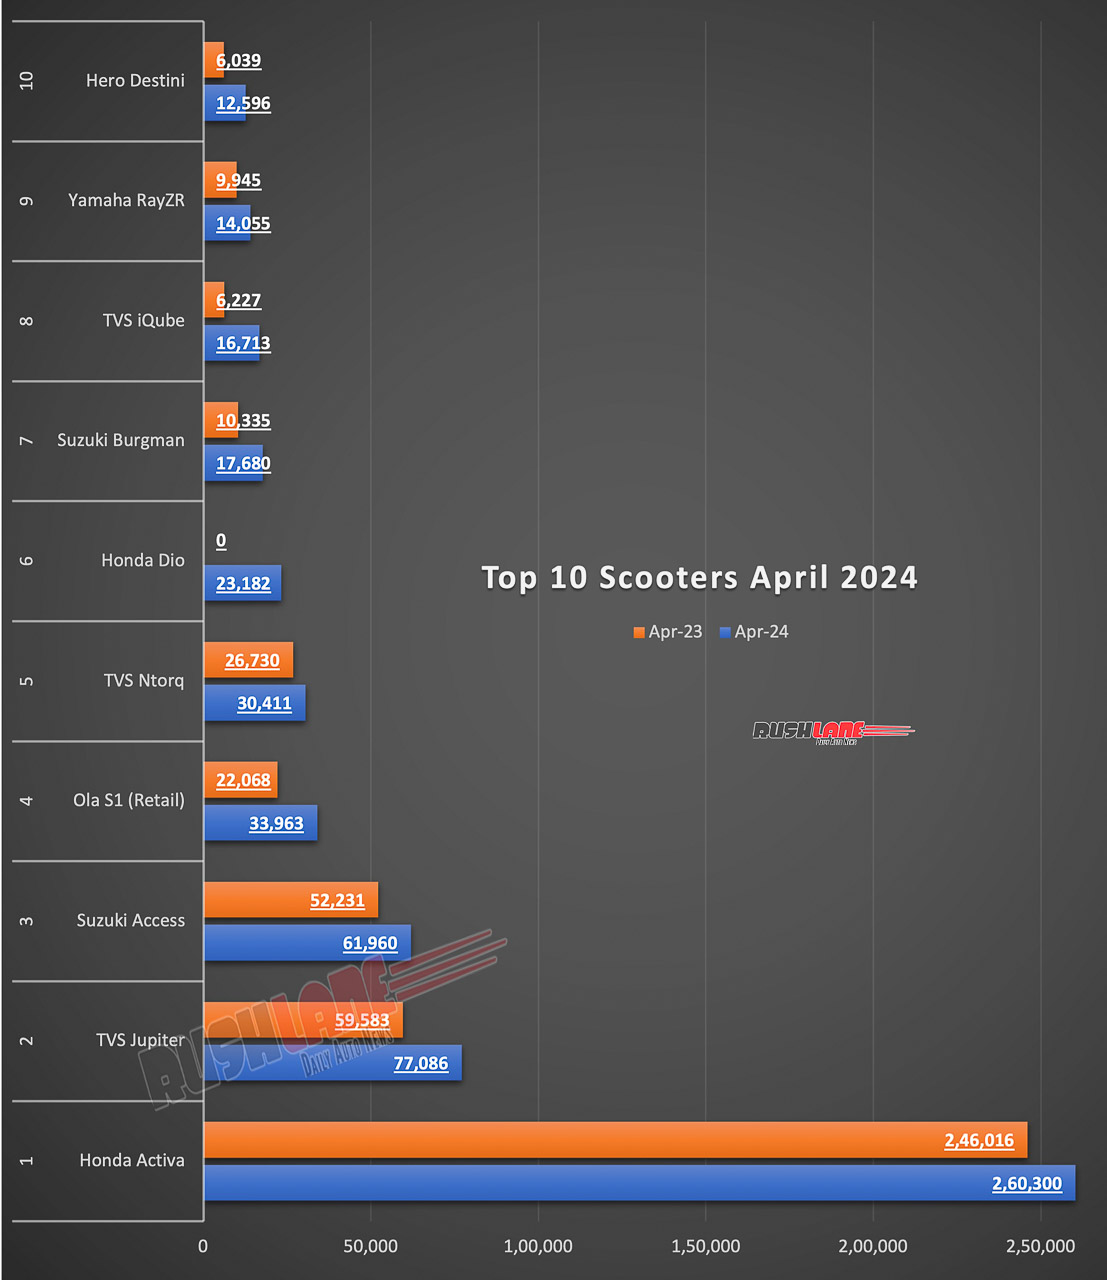 Top 10 Scooters April 2024